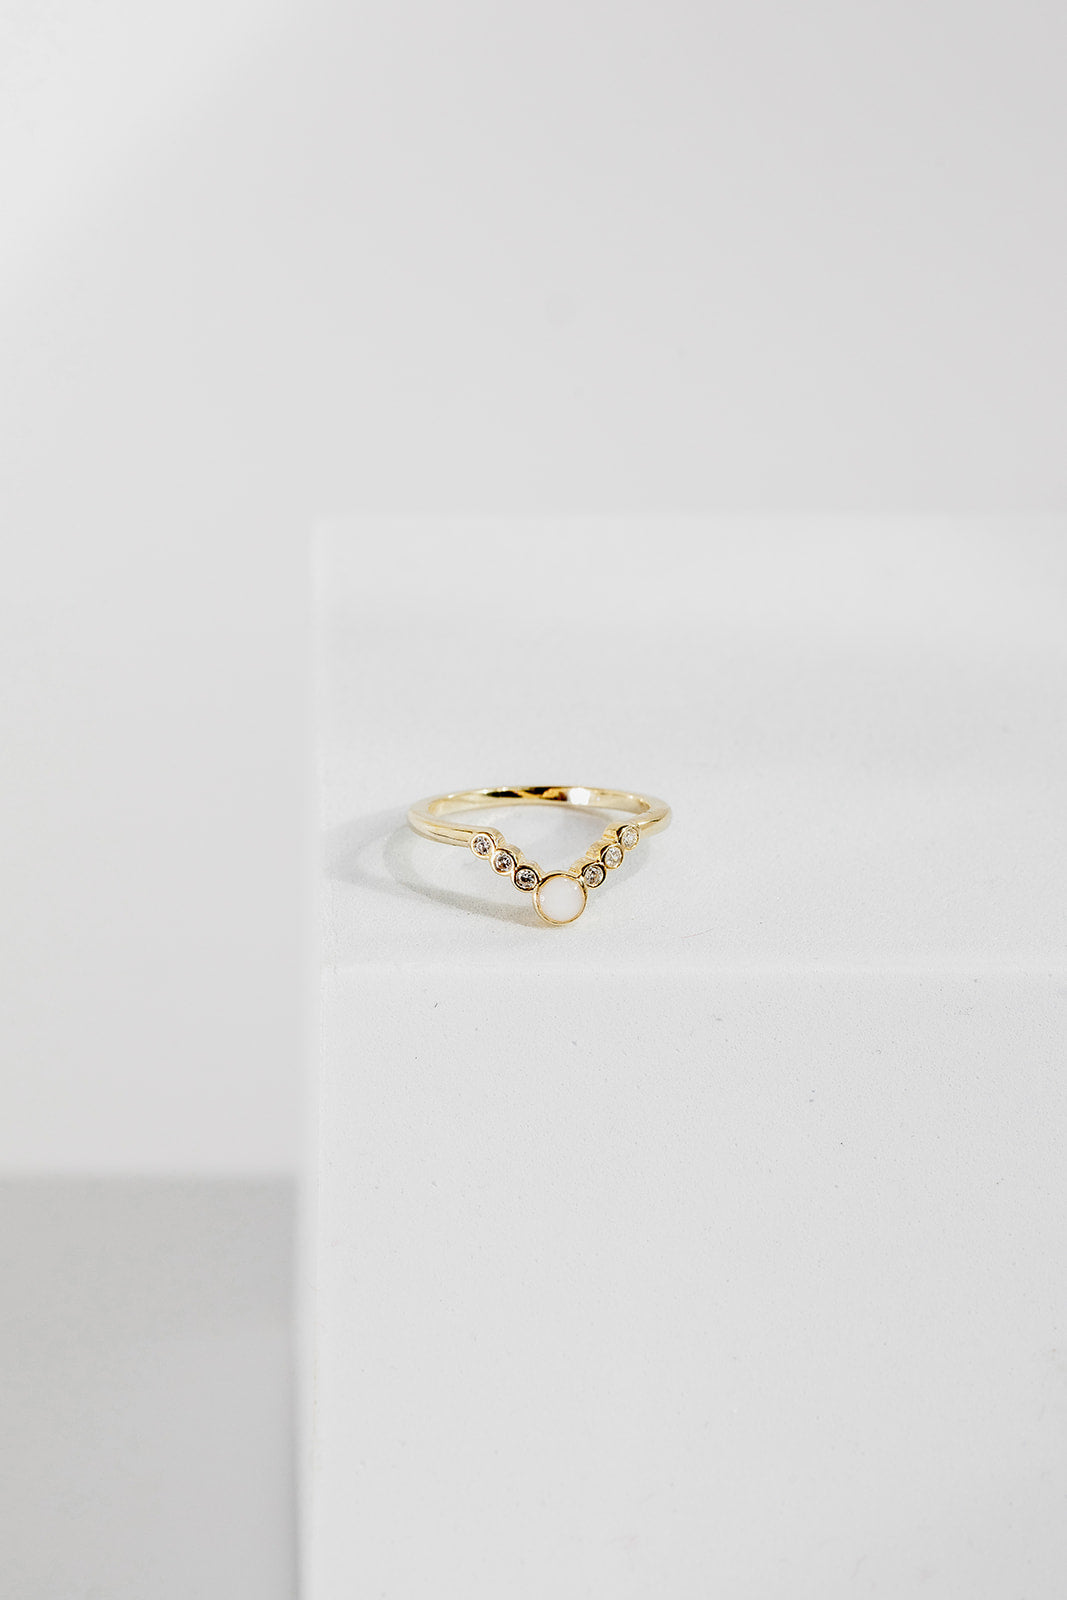 Breastmilk Oval Stacker Ring Set - 9ct Gold